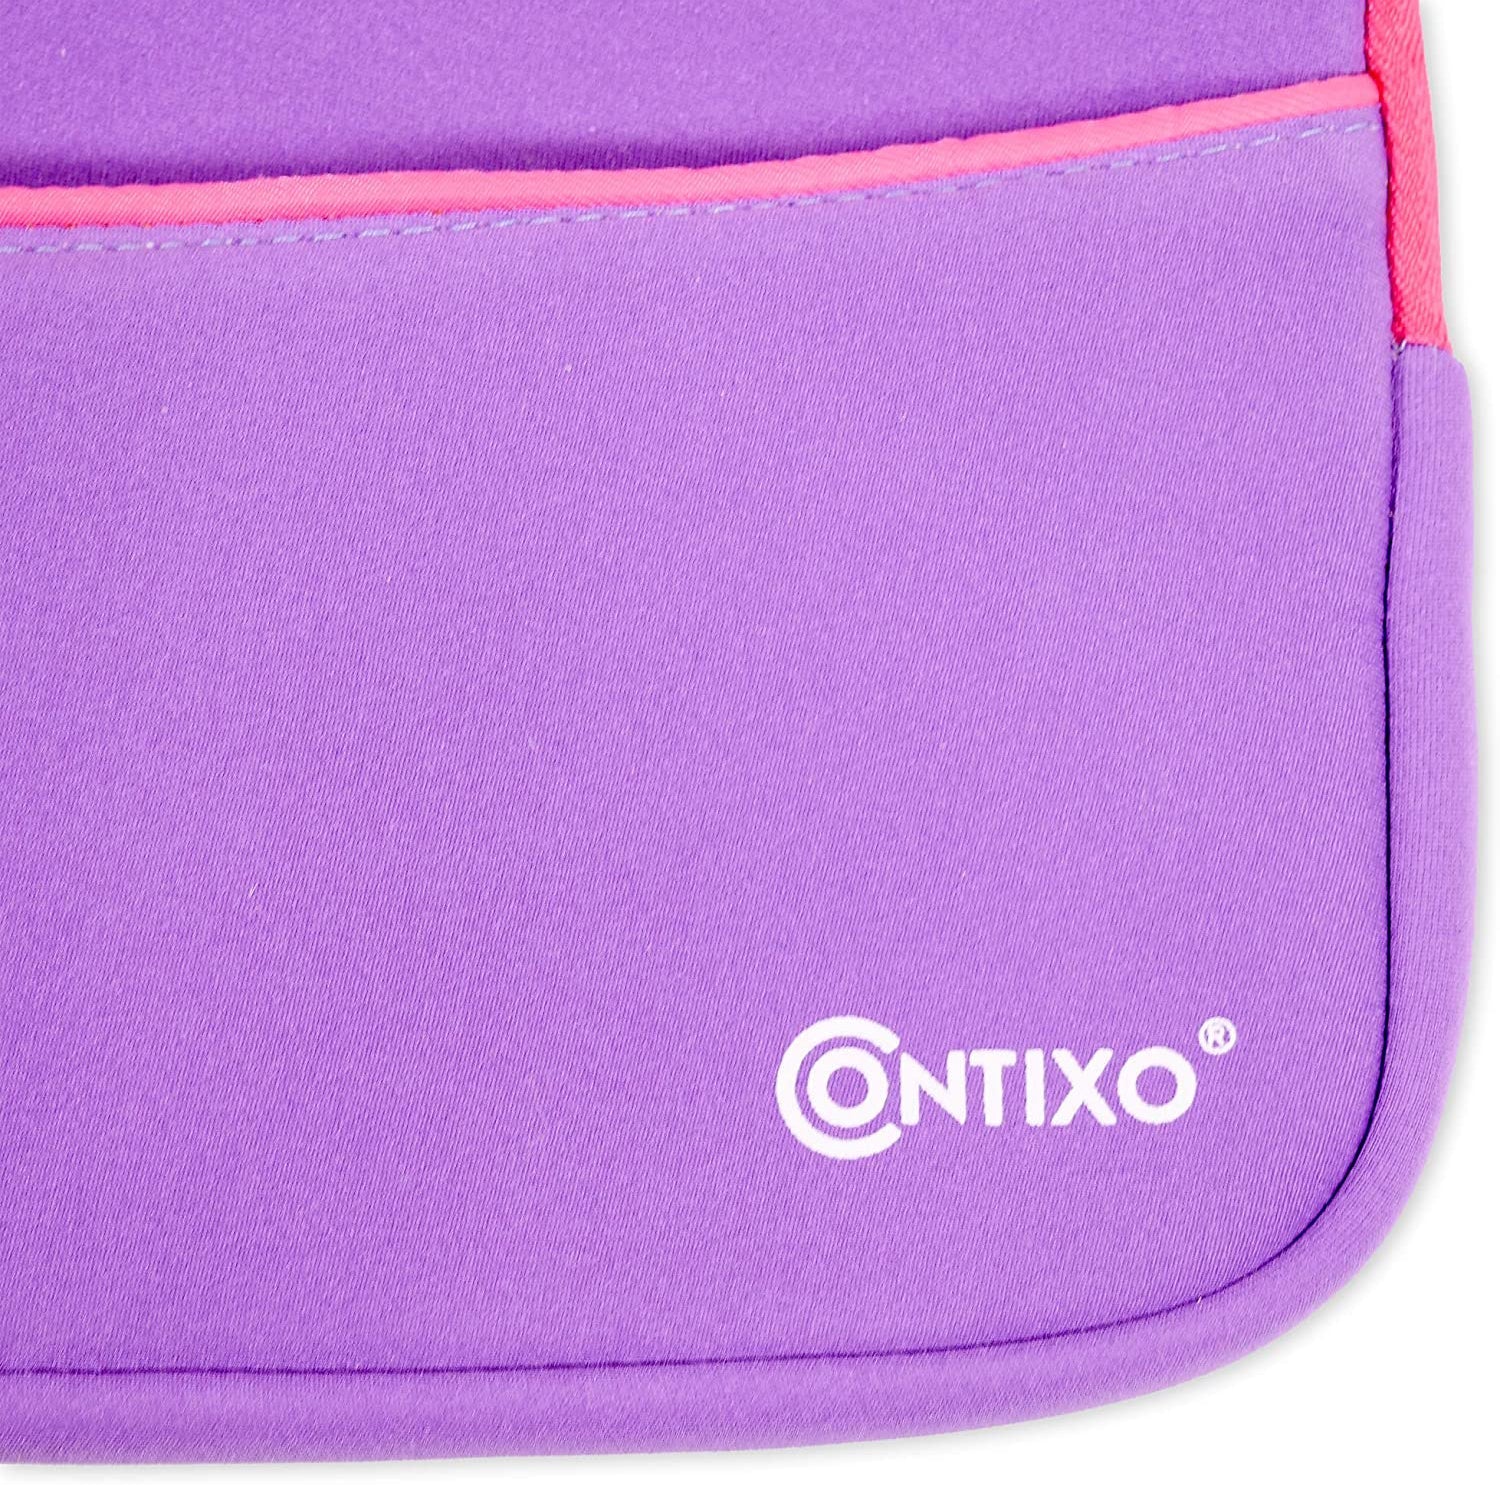 Contixo Protective Carrying Bag Sleeve Case for 10" Tablets